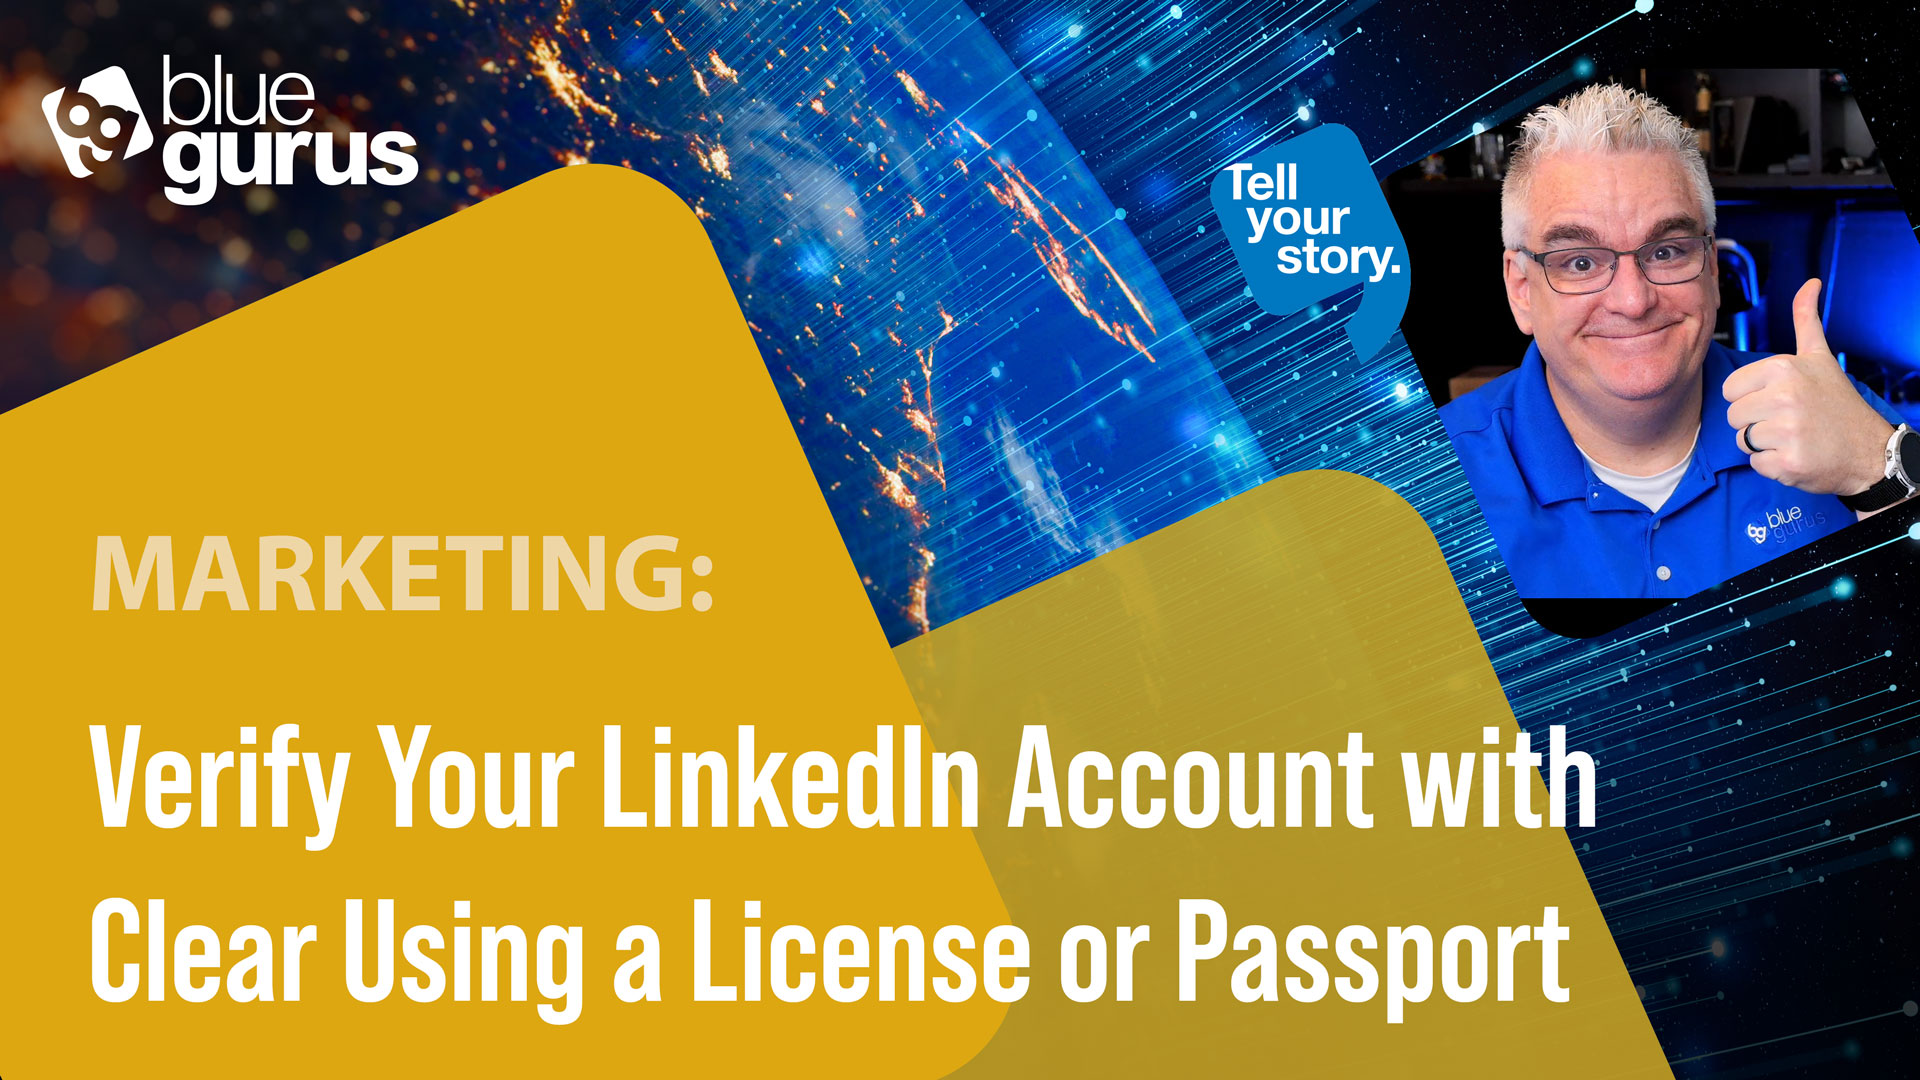 Marketing: Verify Your LinkedIn Account with Clear Using a License or Passport